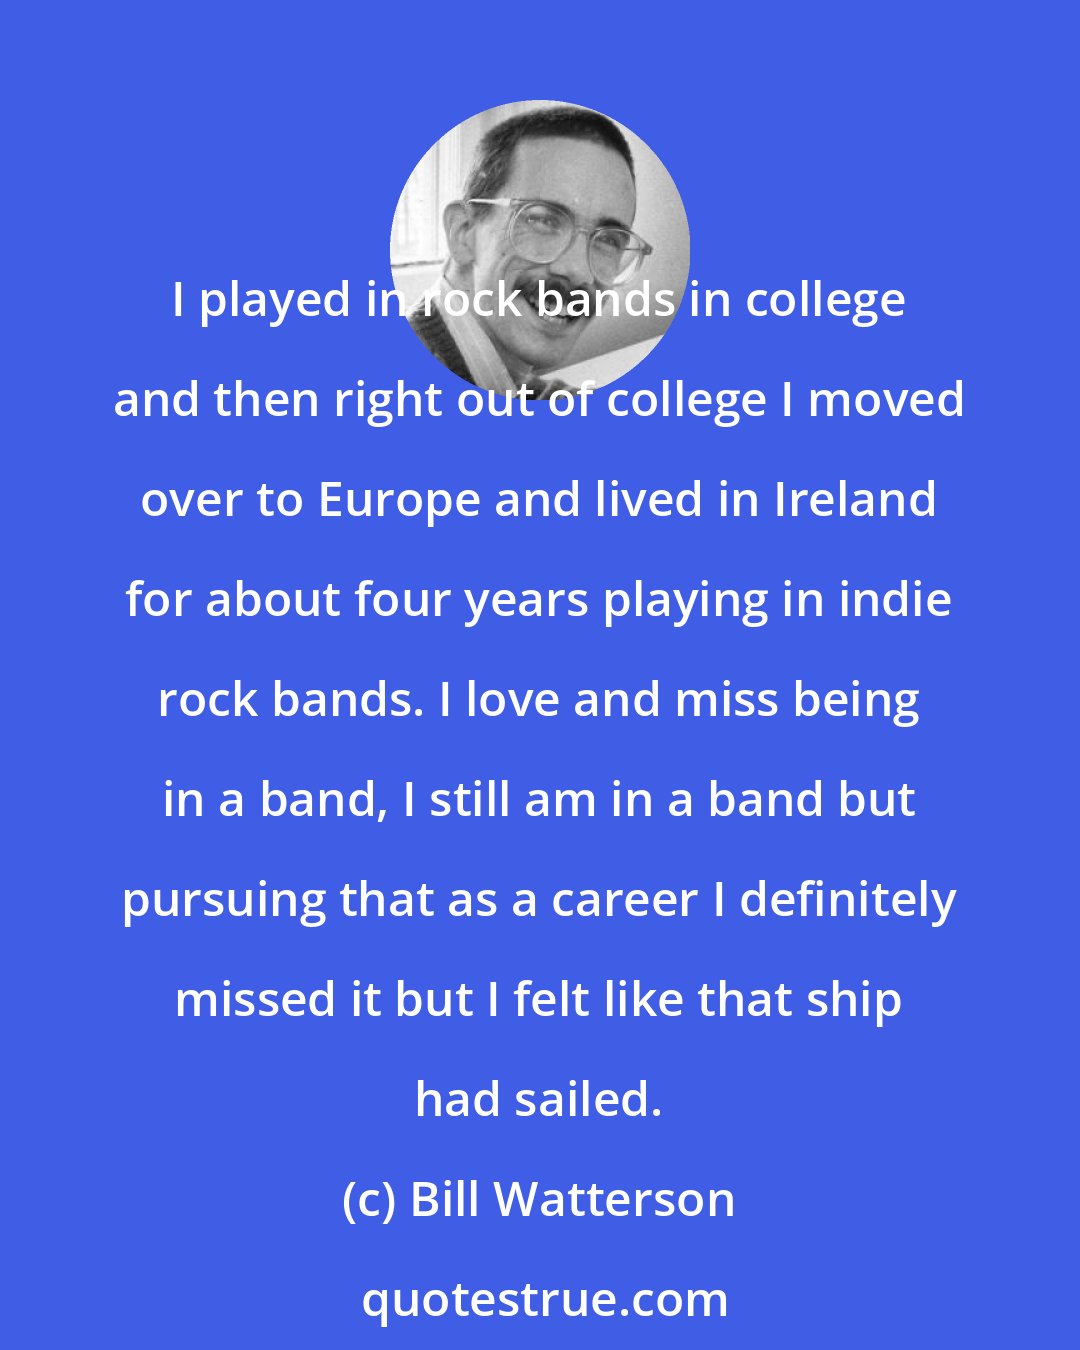 Bill Watterson: I played in rock bands in college and then right out of college I moved over to Europe and lived in Ireland for about four years playing in indie rock bands. I love and miss being in a band, I still am in a band but pursuing that as a career I definitely missed it but I felt like that ship had sailed.